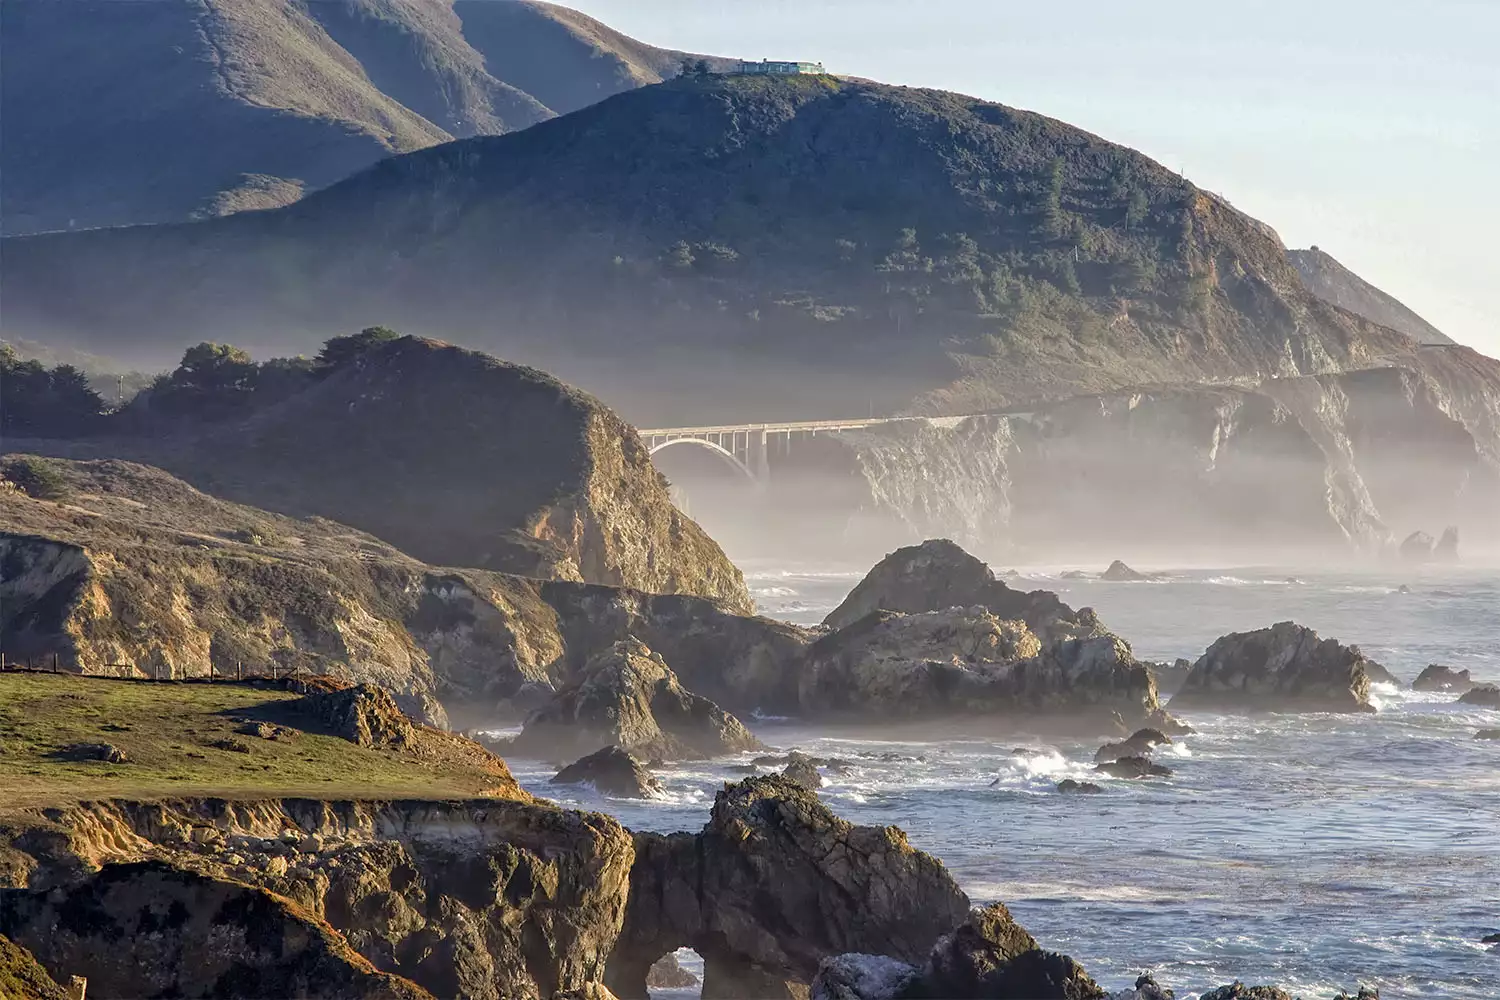 The misty and rocky coast of Big Sur on a partially cloudy day in California